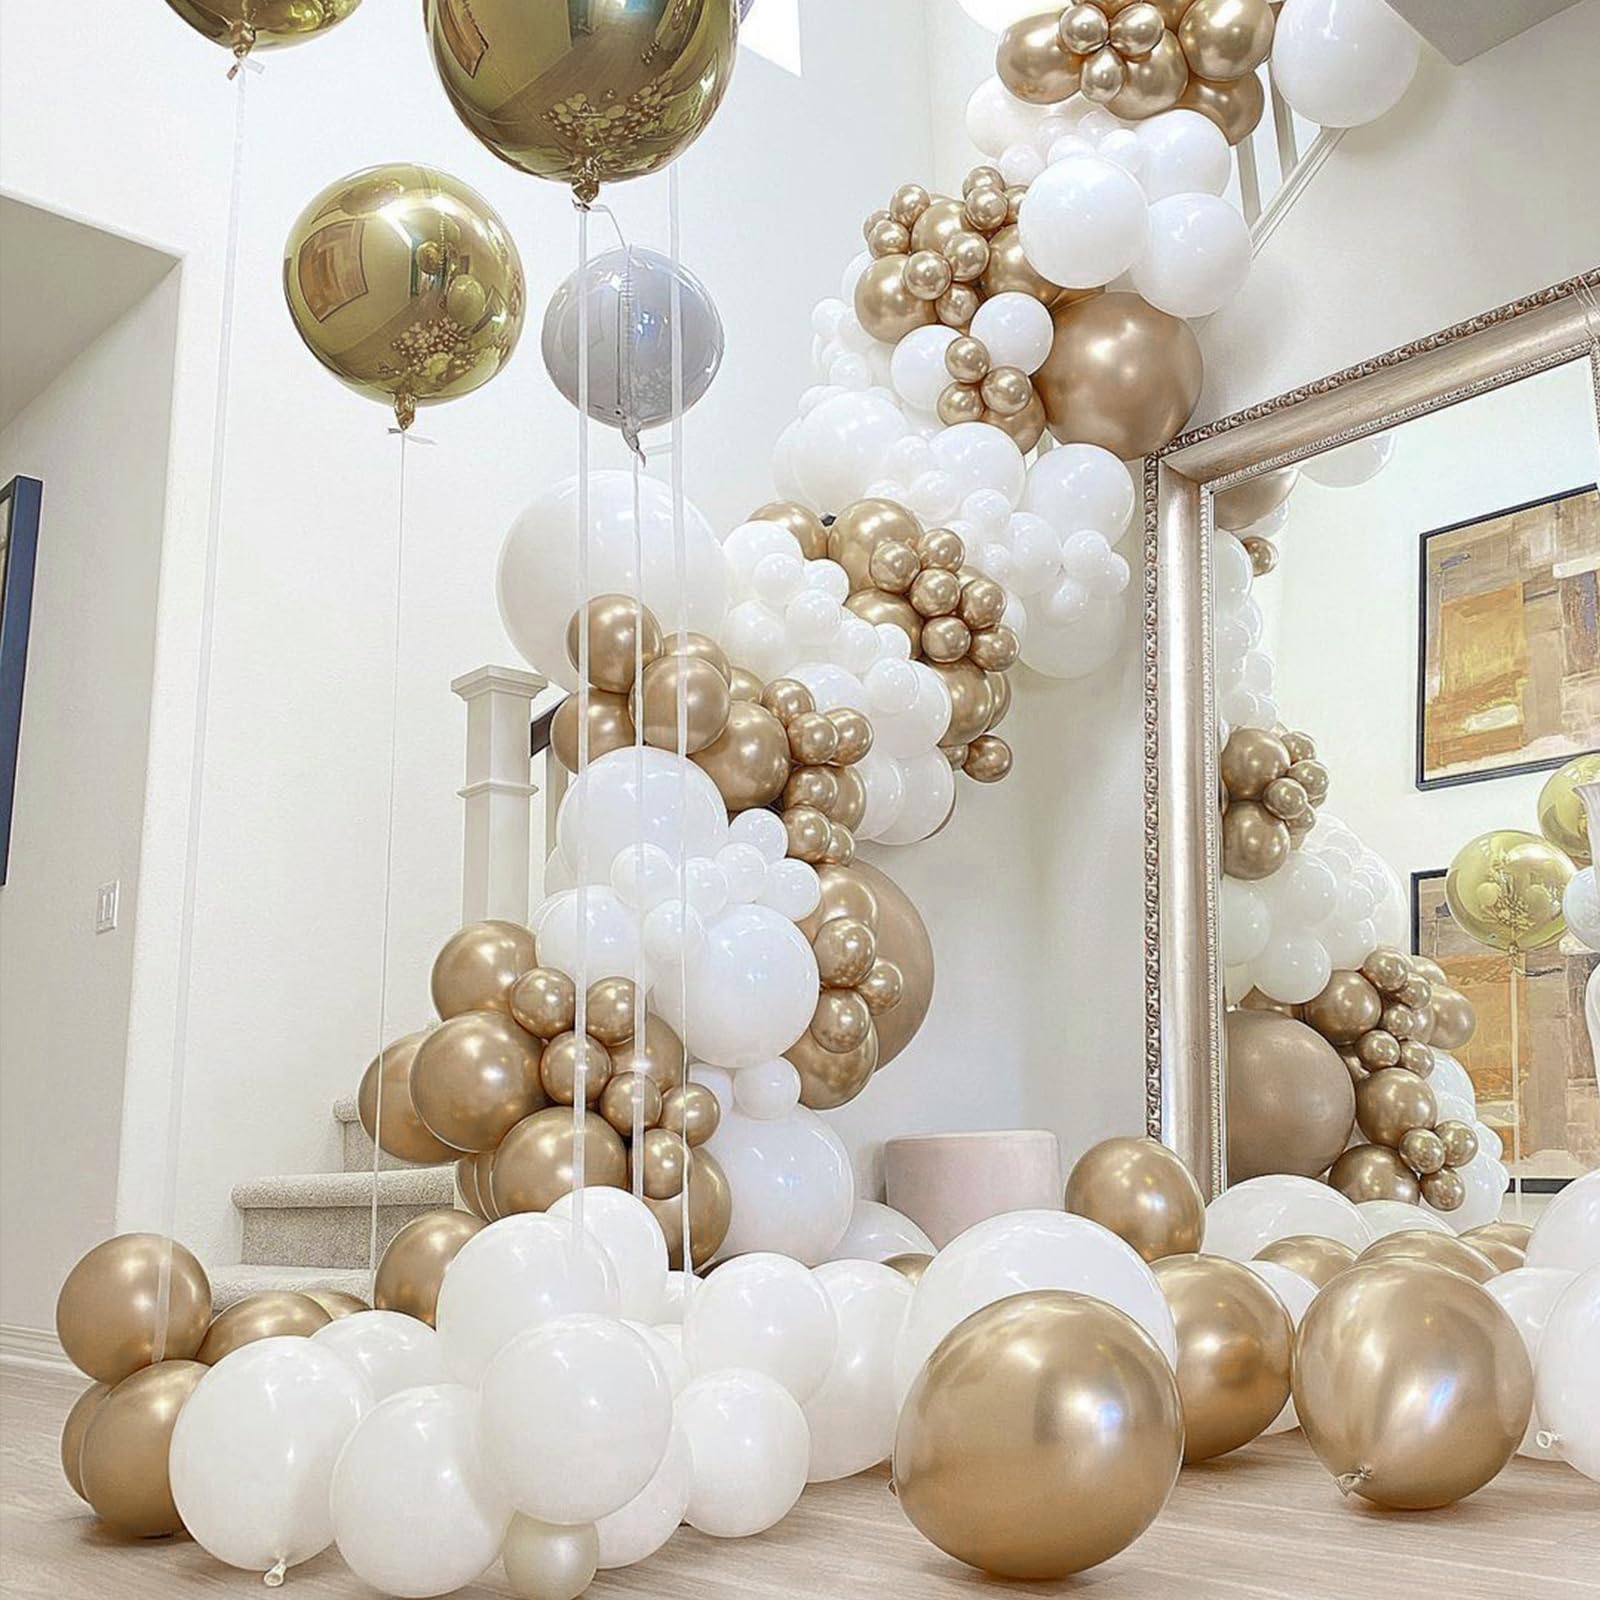 PartyWoo Chrome Gold Balloons, 100 pcs Gold Chrome Balloons Different Sizes Pack of 18 Inch 12 Inch 10 Inch 5 Inch for Balloon Garland or Balloon Arch as Birthday Decorations, Party Decorations